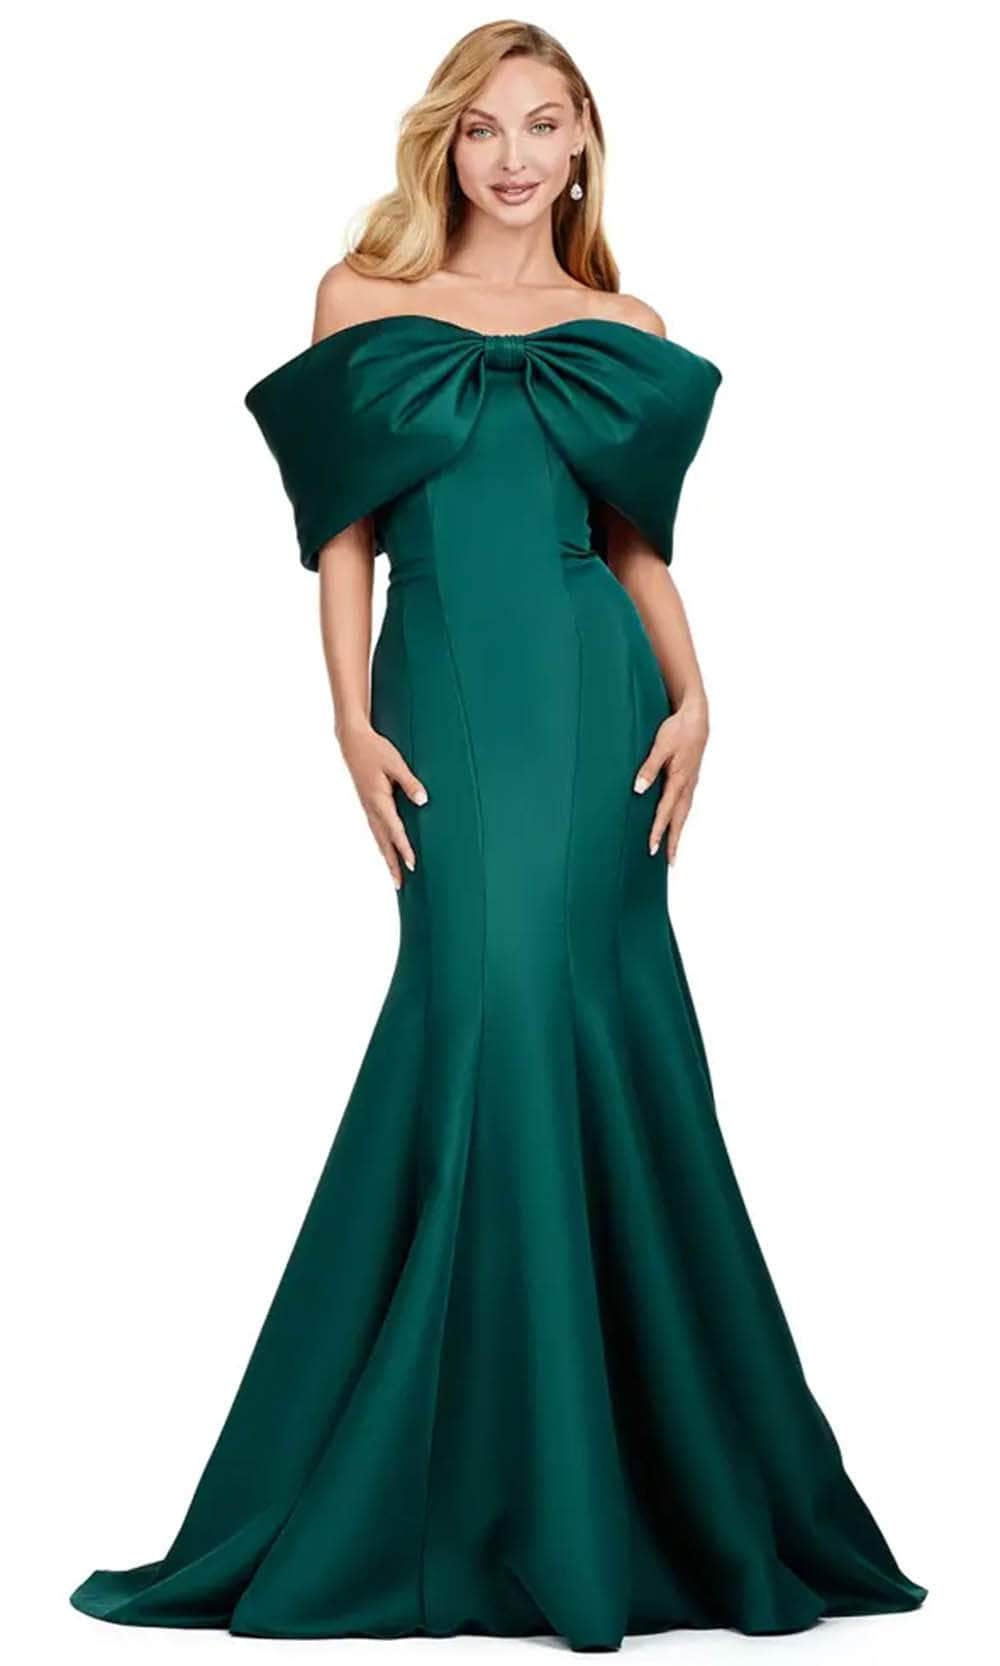 Image of Ashley Lauren 11413 - Bow Accent Satin Mermaid Gown